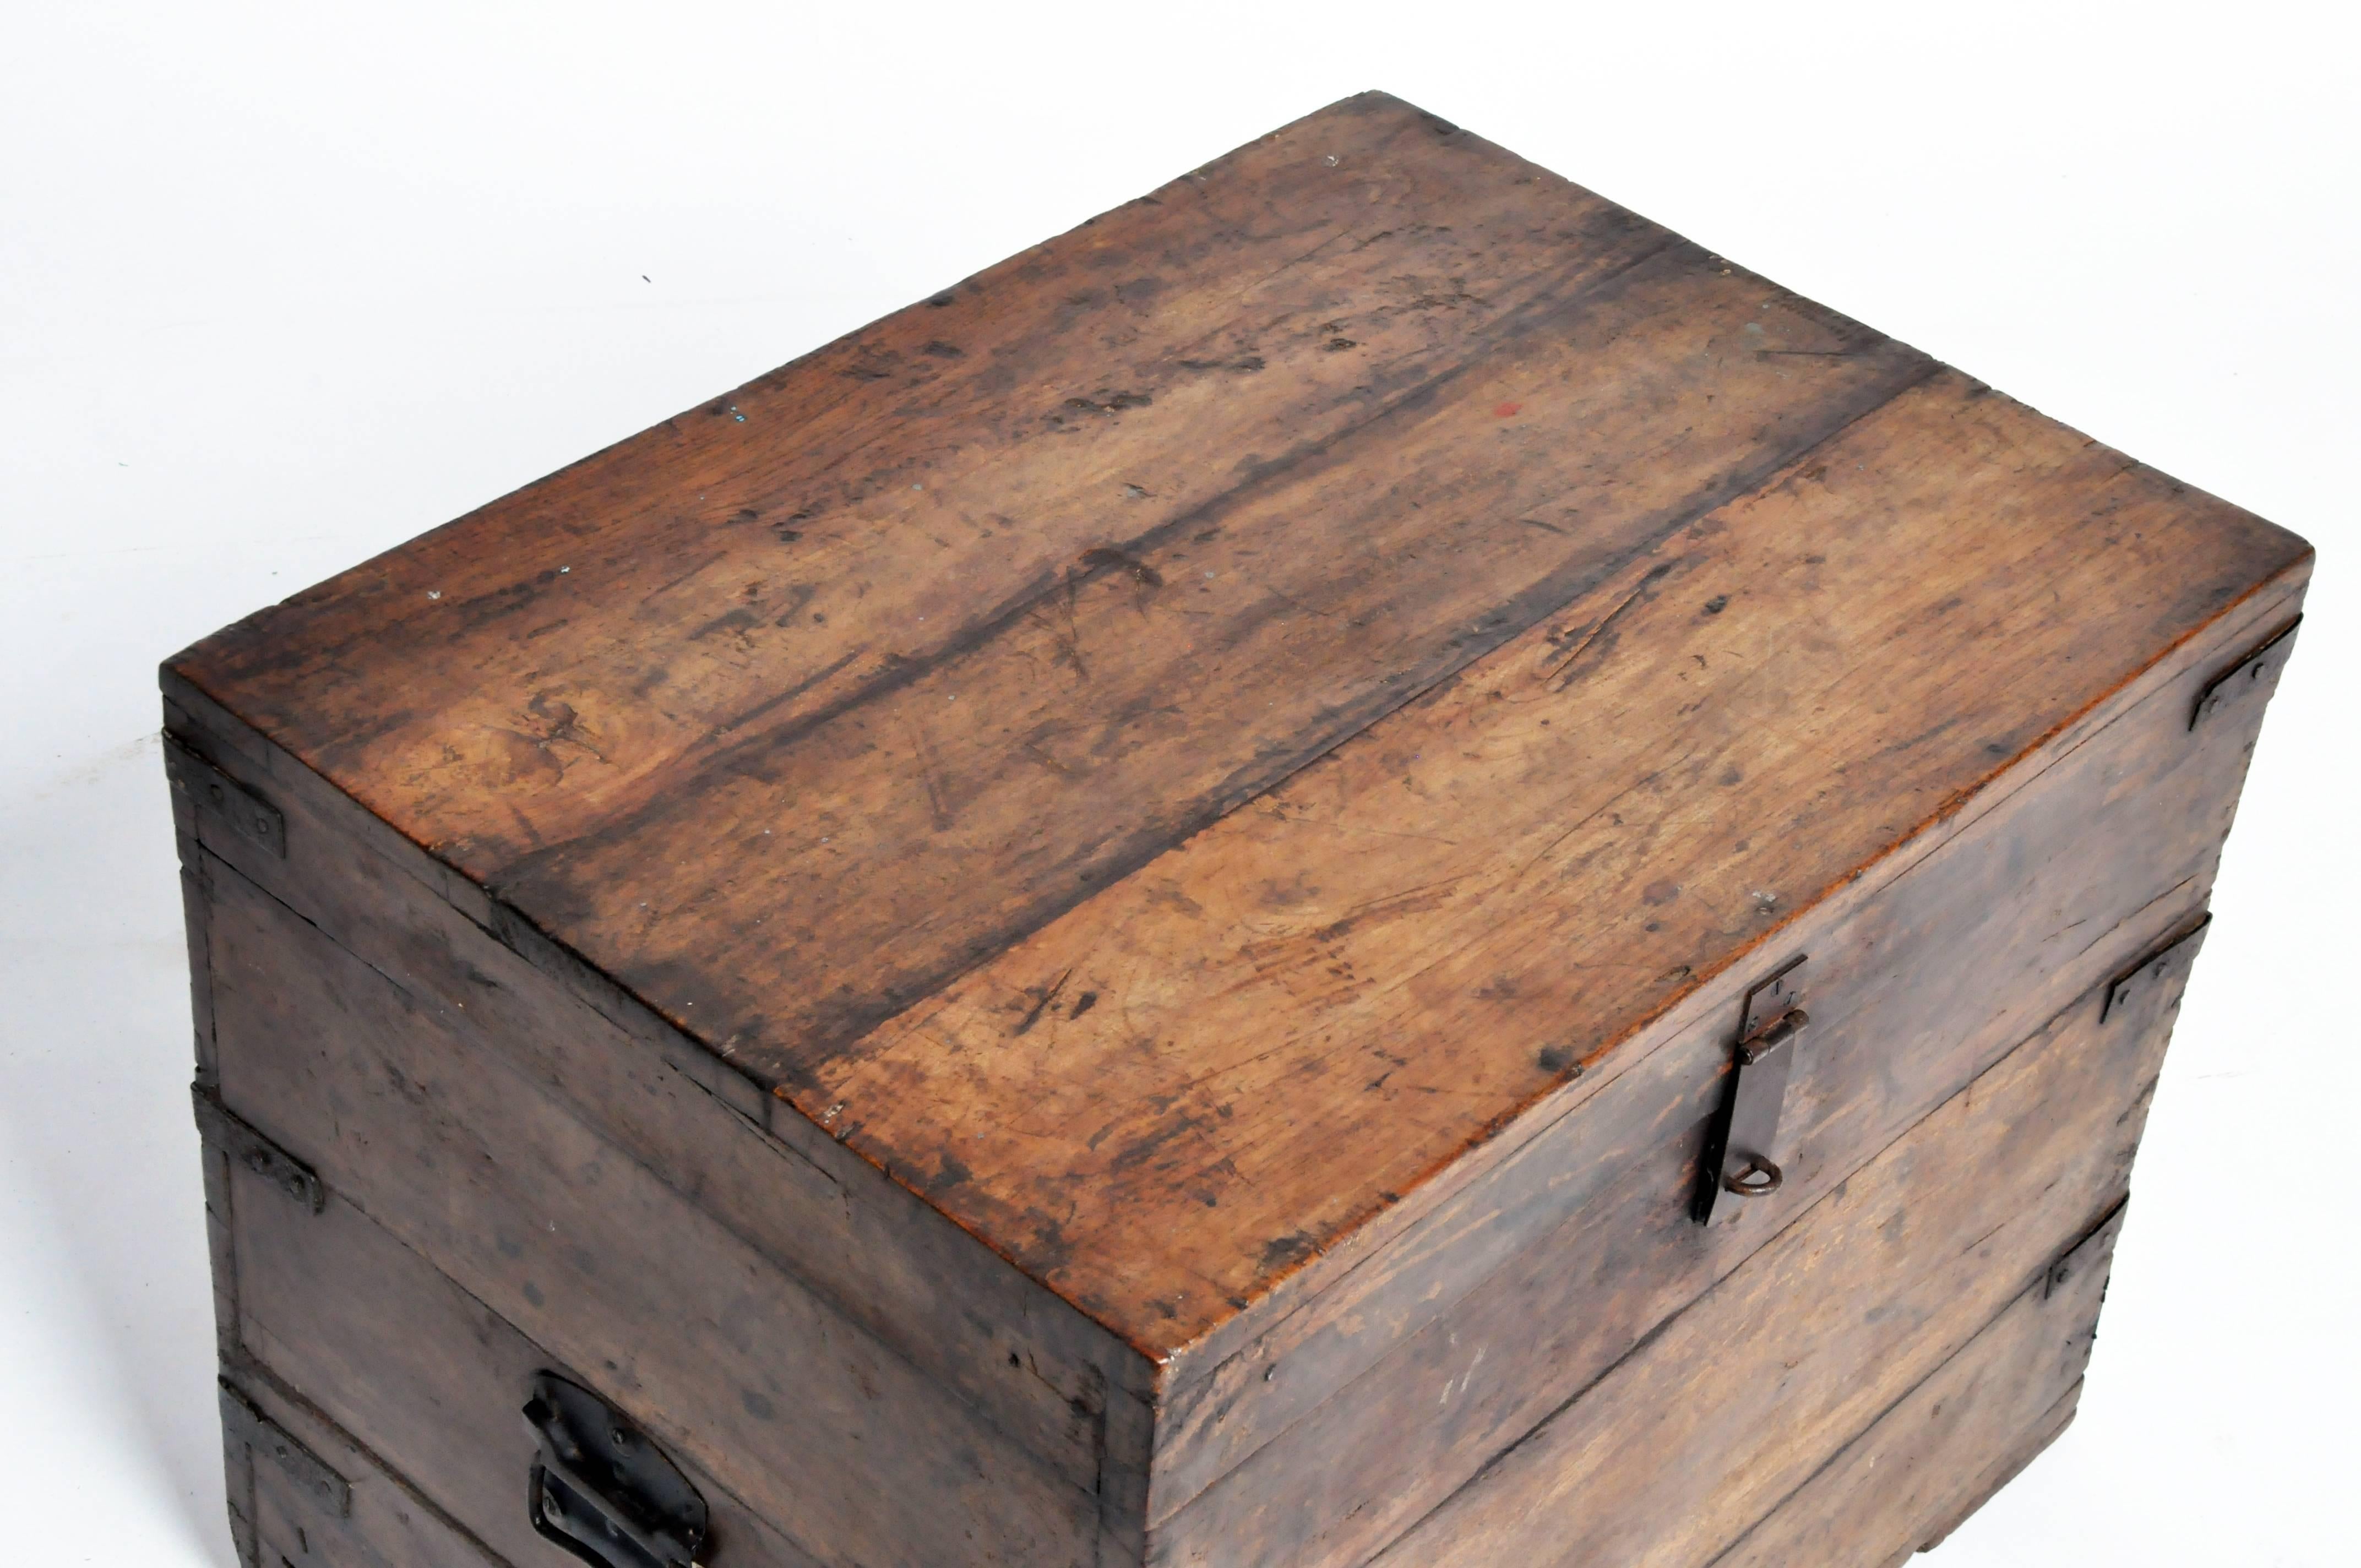 Indian Wooden Storage Box with Metal Trim